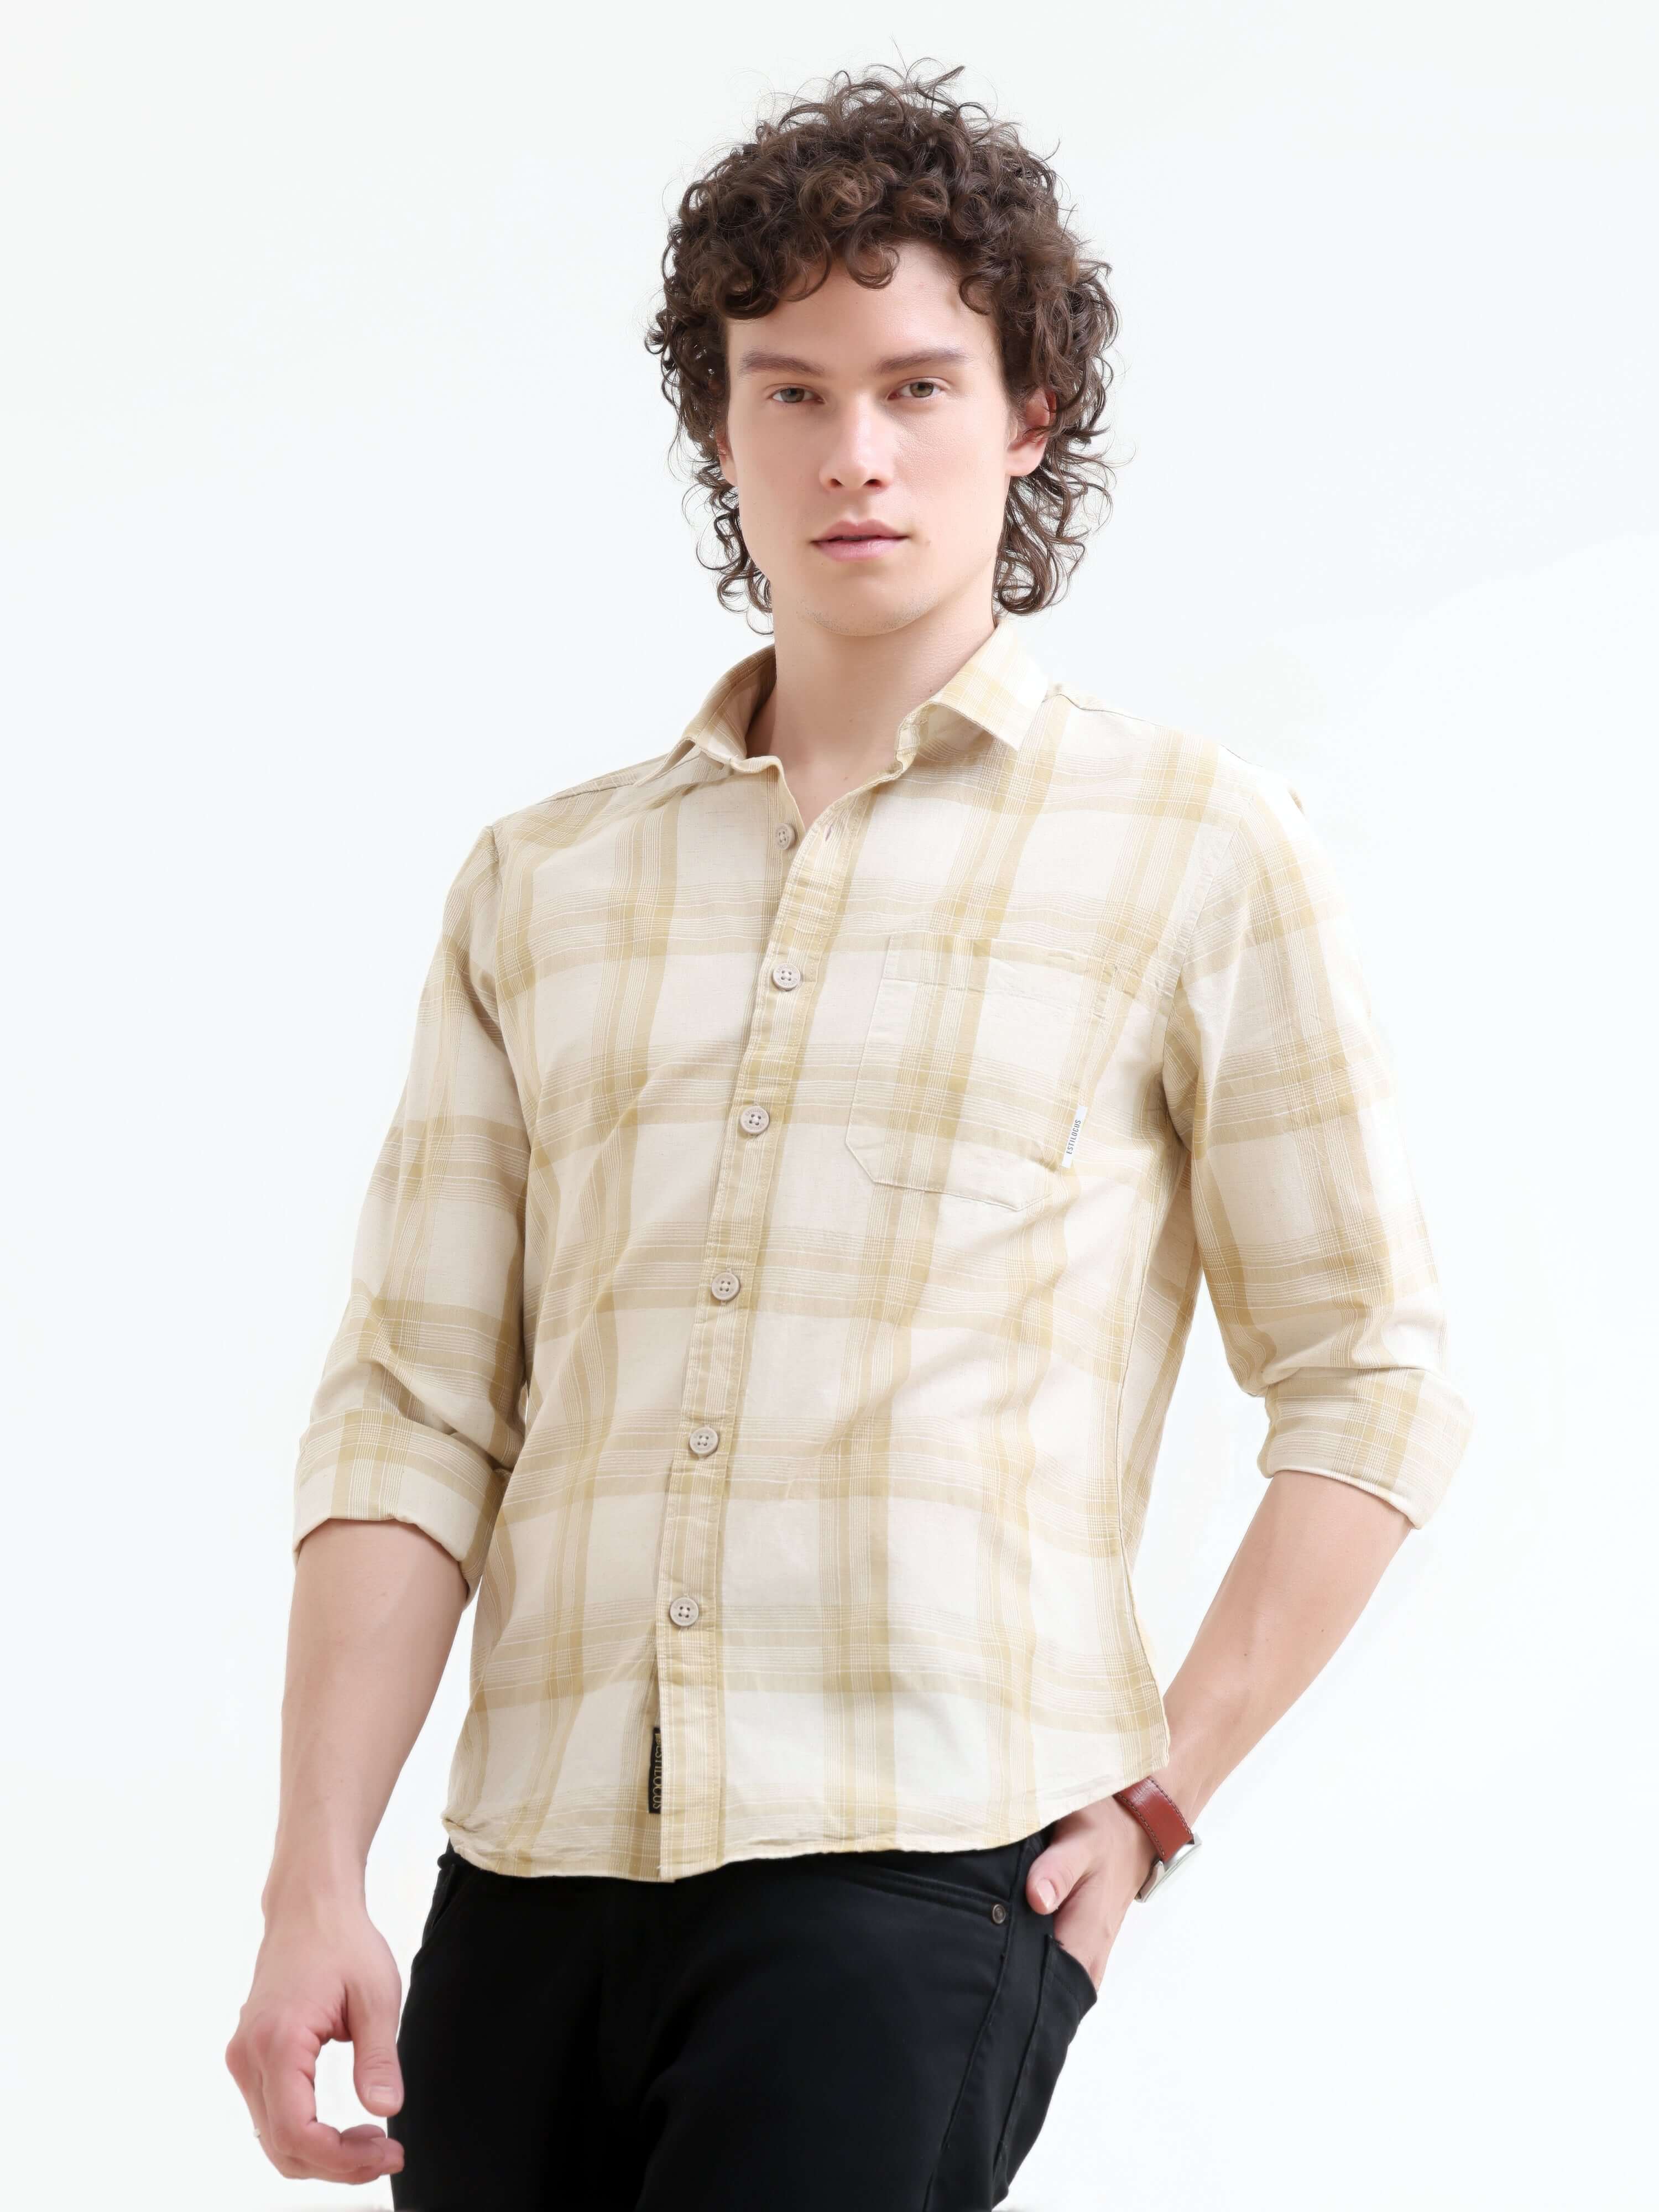 Men's Pierck Beige Check Shirt - New Summer Arrival shop online at Estilocus. Explore the new Pierck Cotton Check Shirt for a stylish summer. Breathable, comfy & perfect for any casual occasion. Shop Now!